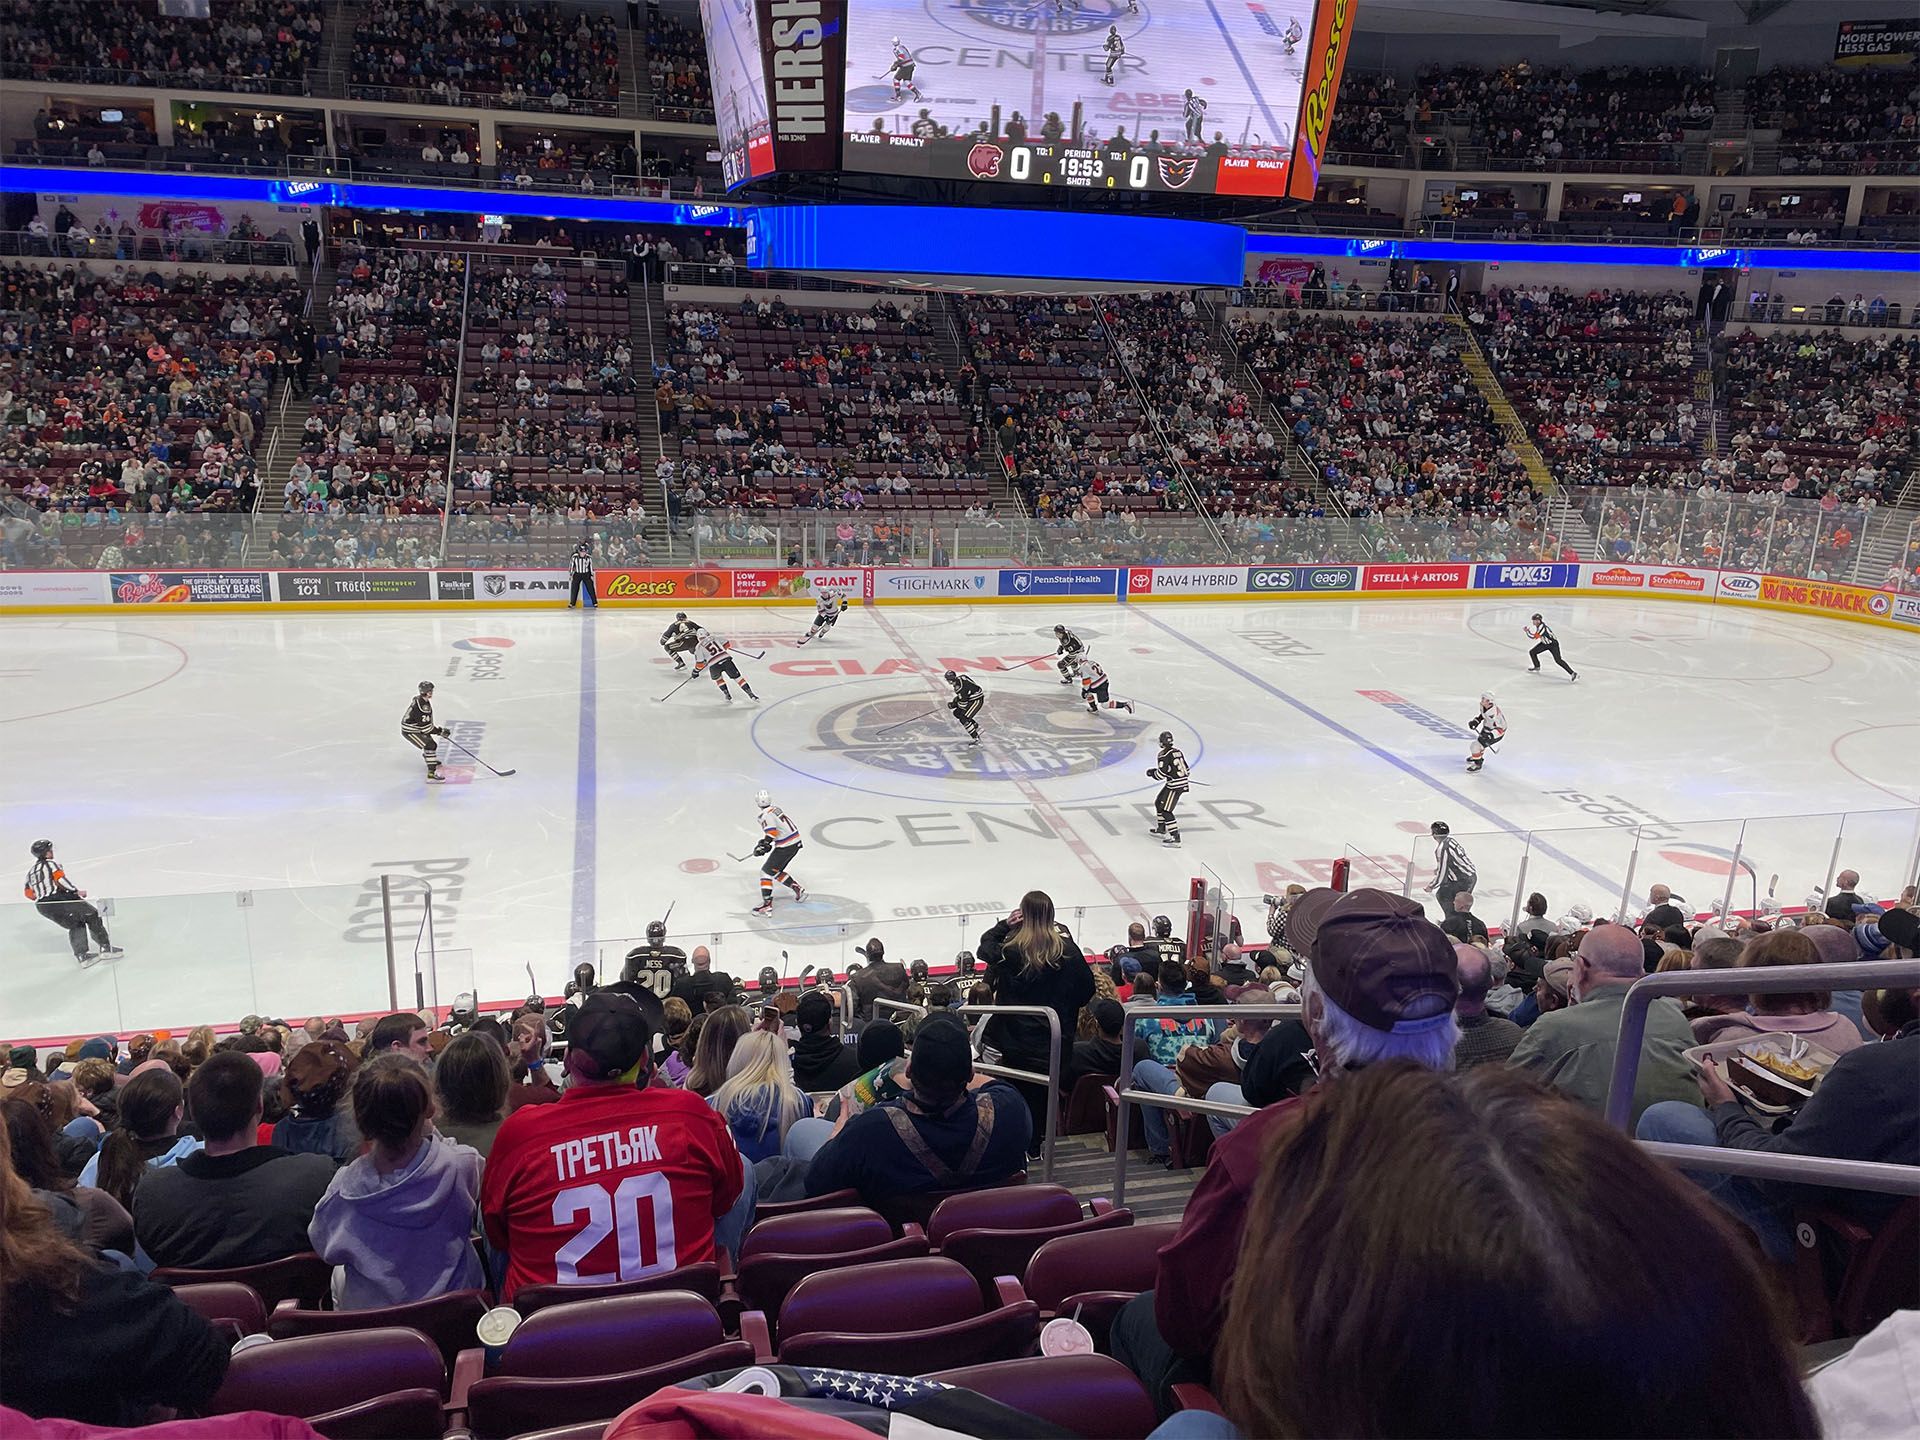 The Lehigh Valley Phantoms playing the Hershey Bears in a hockey game at the Giant Center in Hershey, Pennsylvania